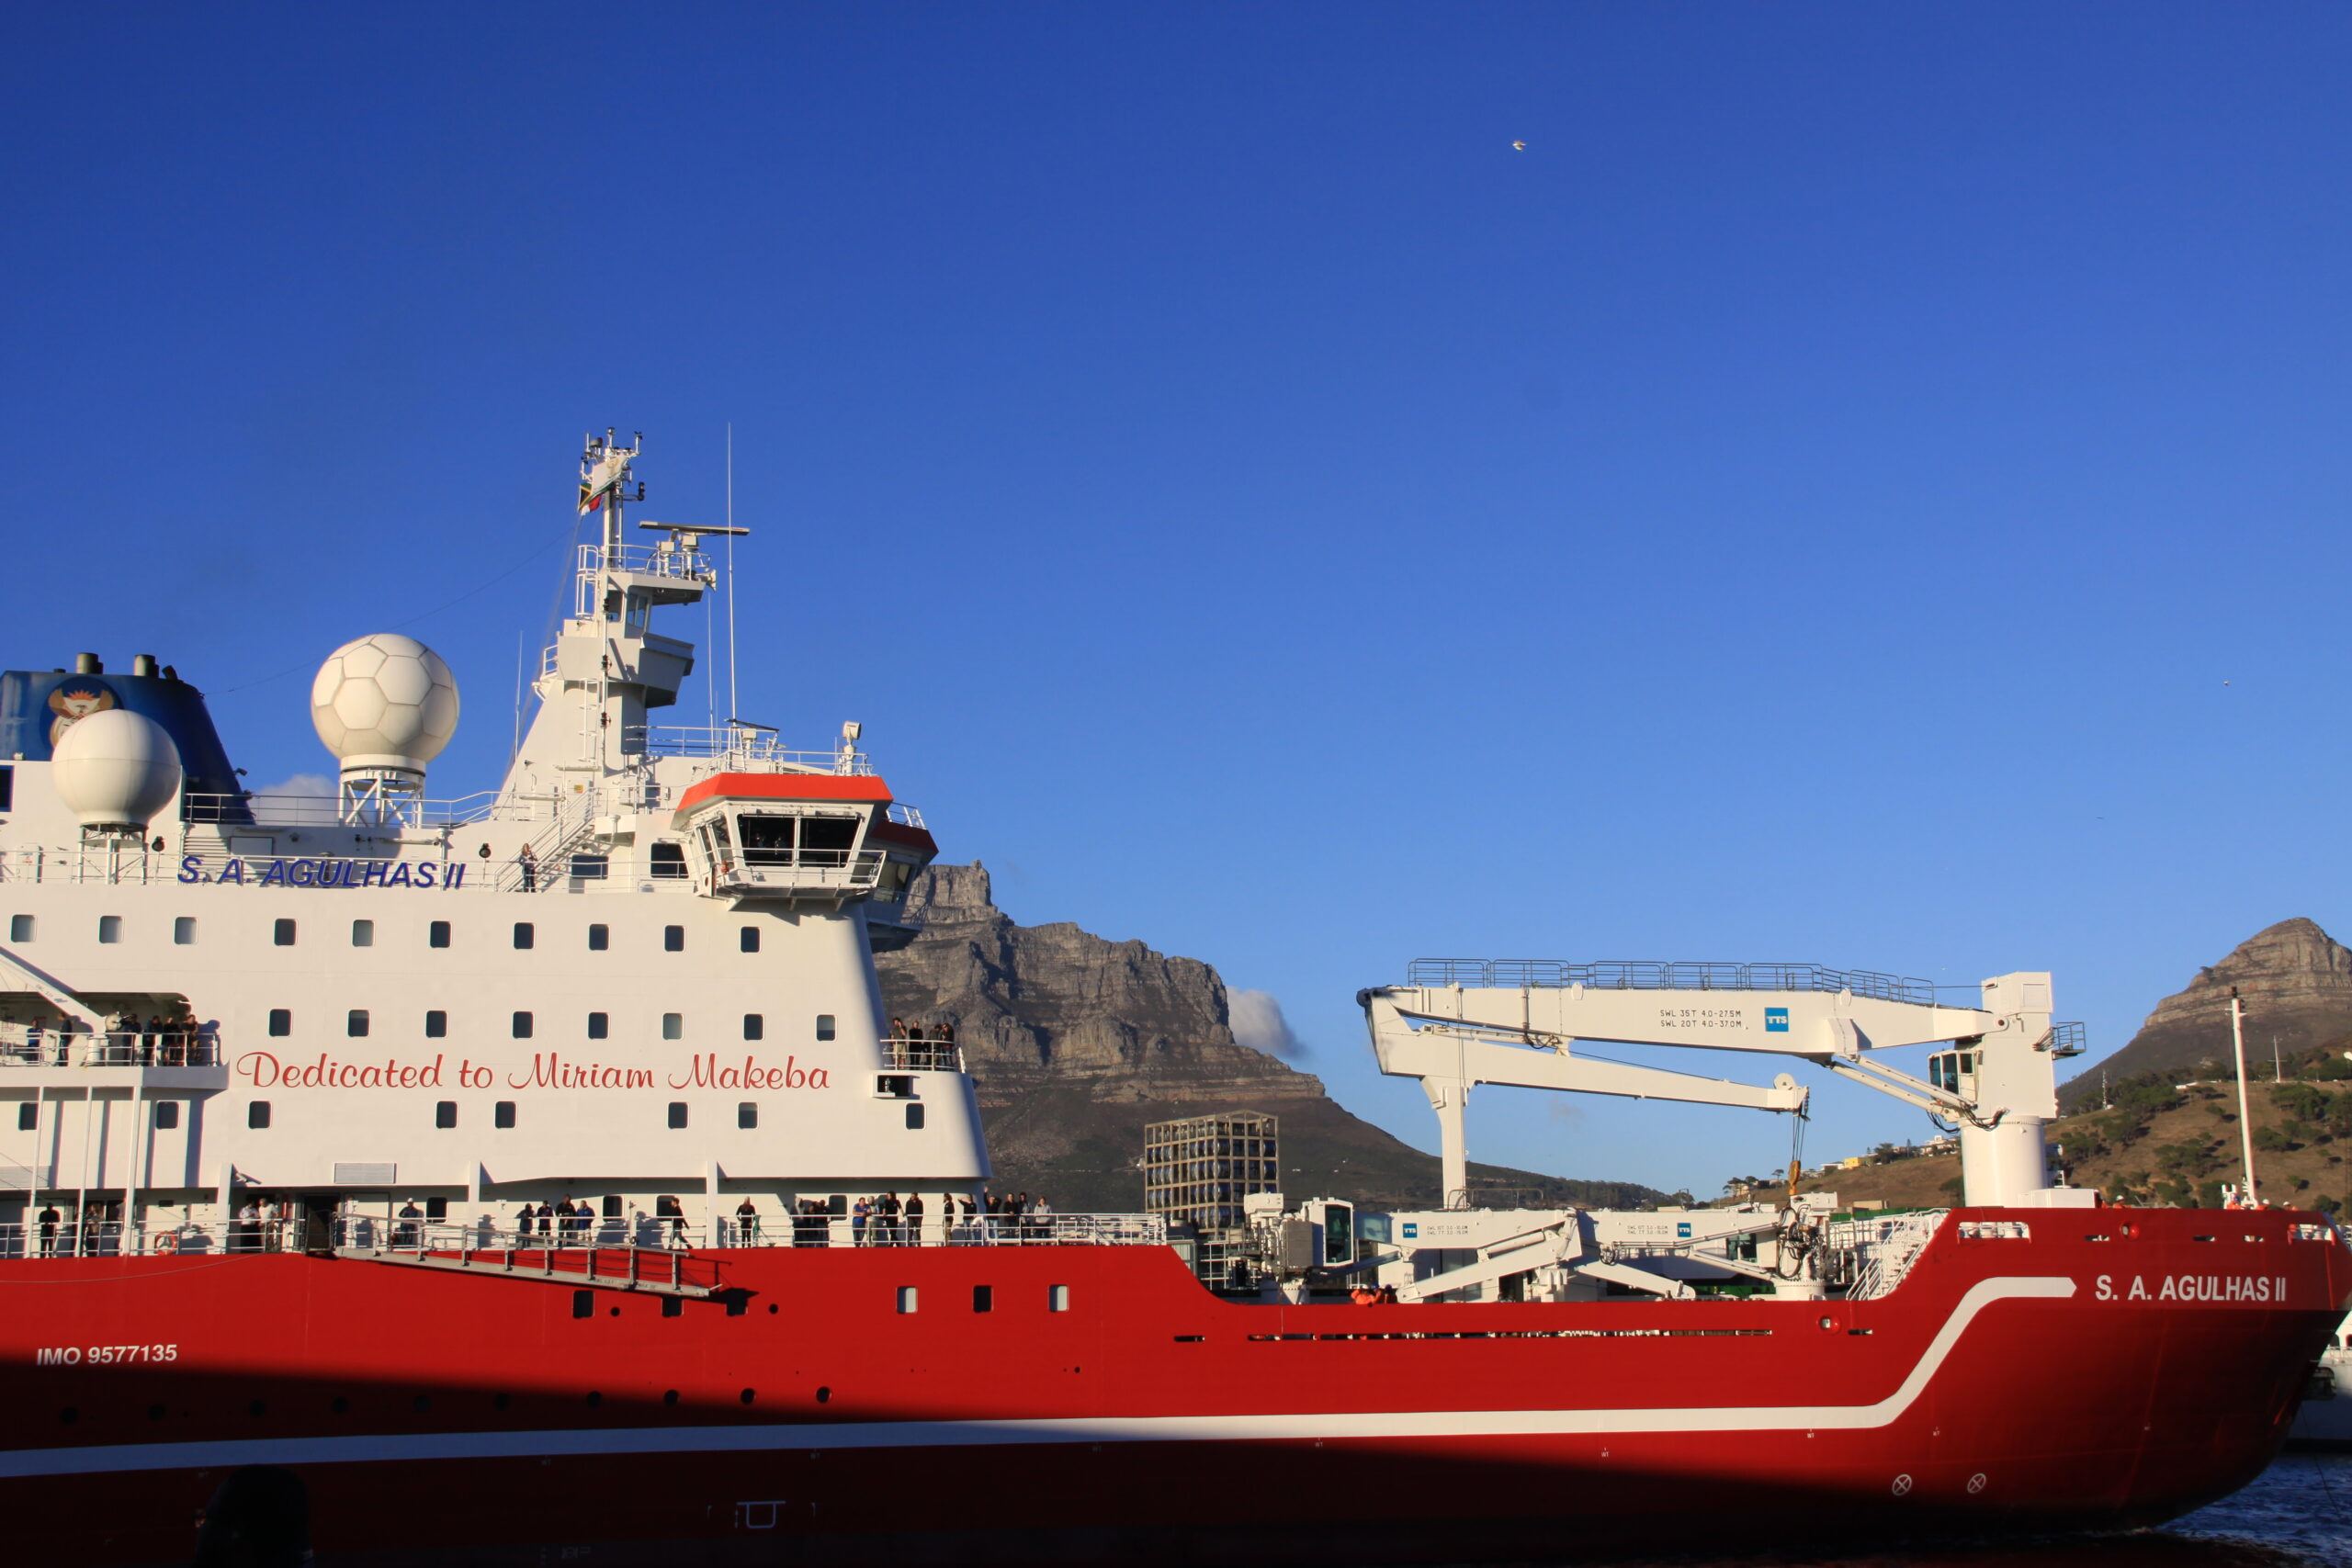 Today in history: the brand new S.A. Agulhas II arrives in Cape Town